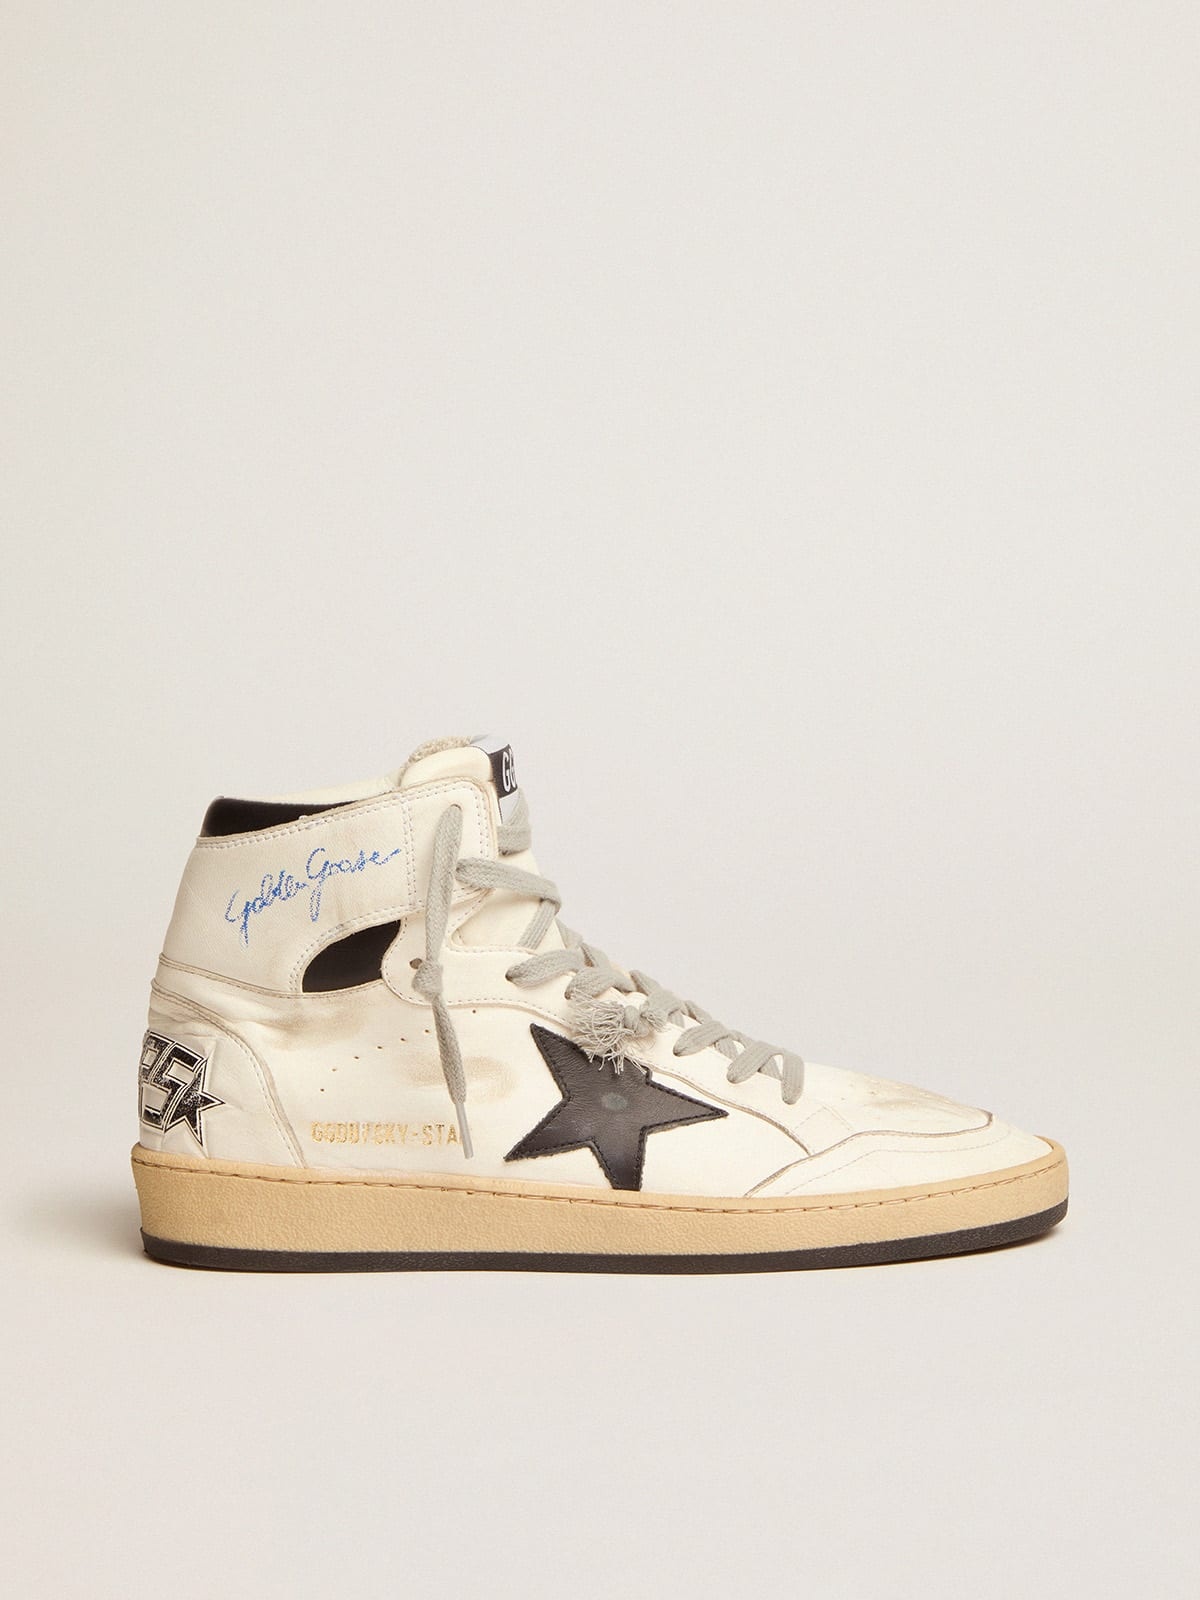 Men's Sky-Star with signature on the ankle and black inserts - 1